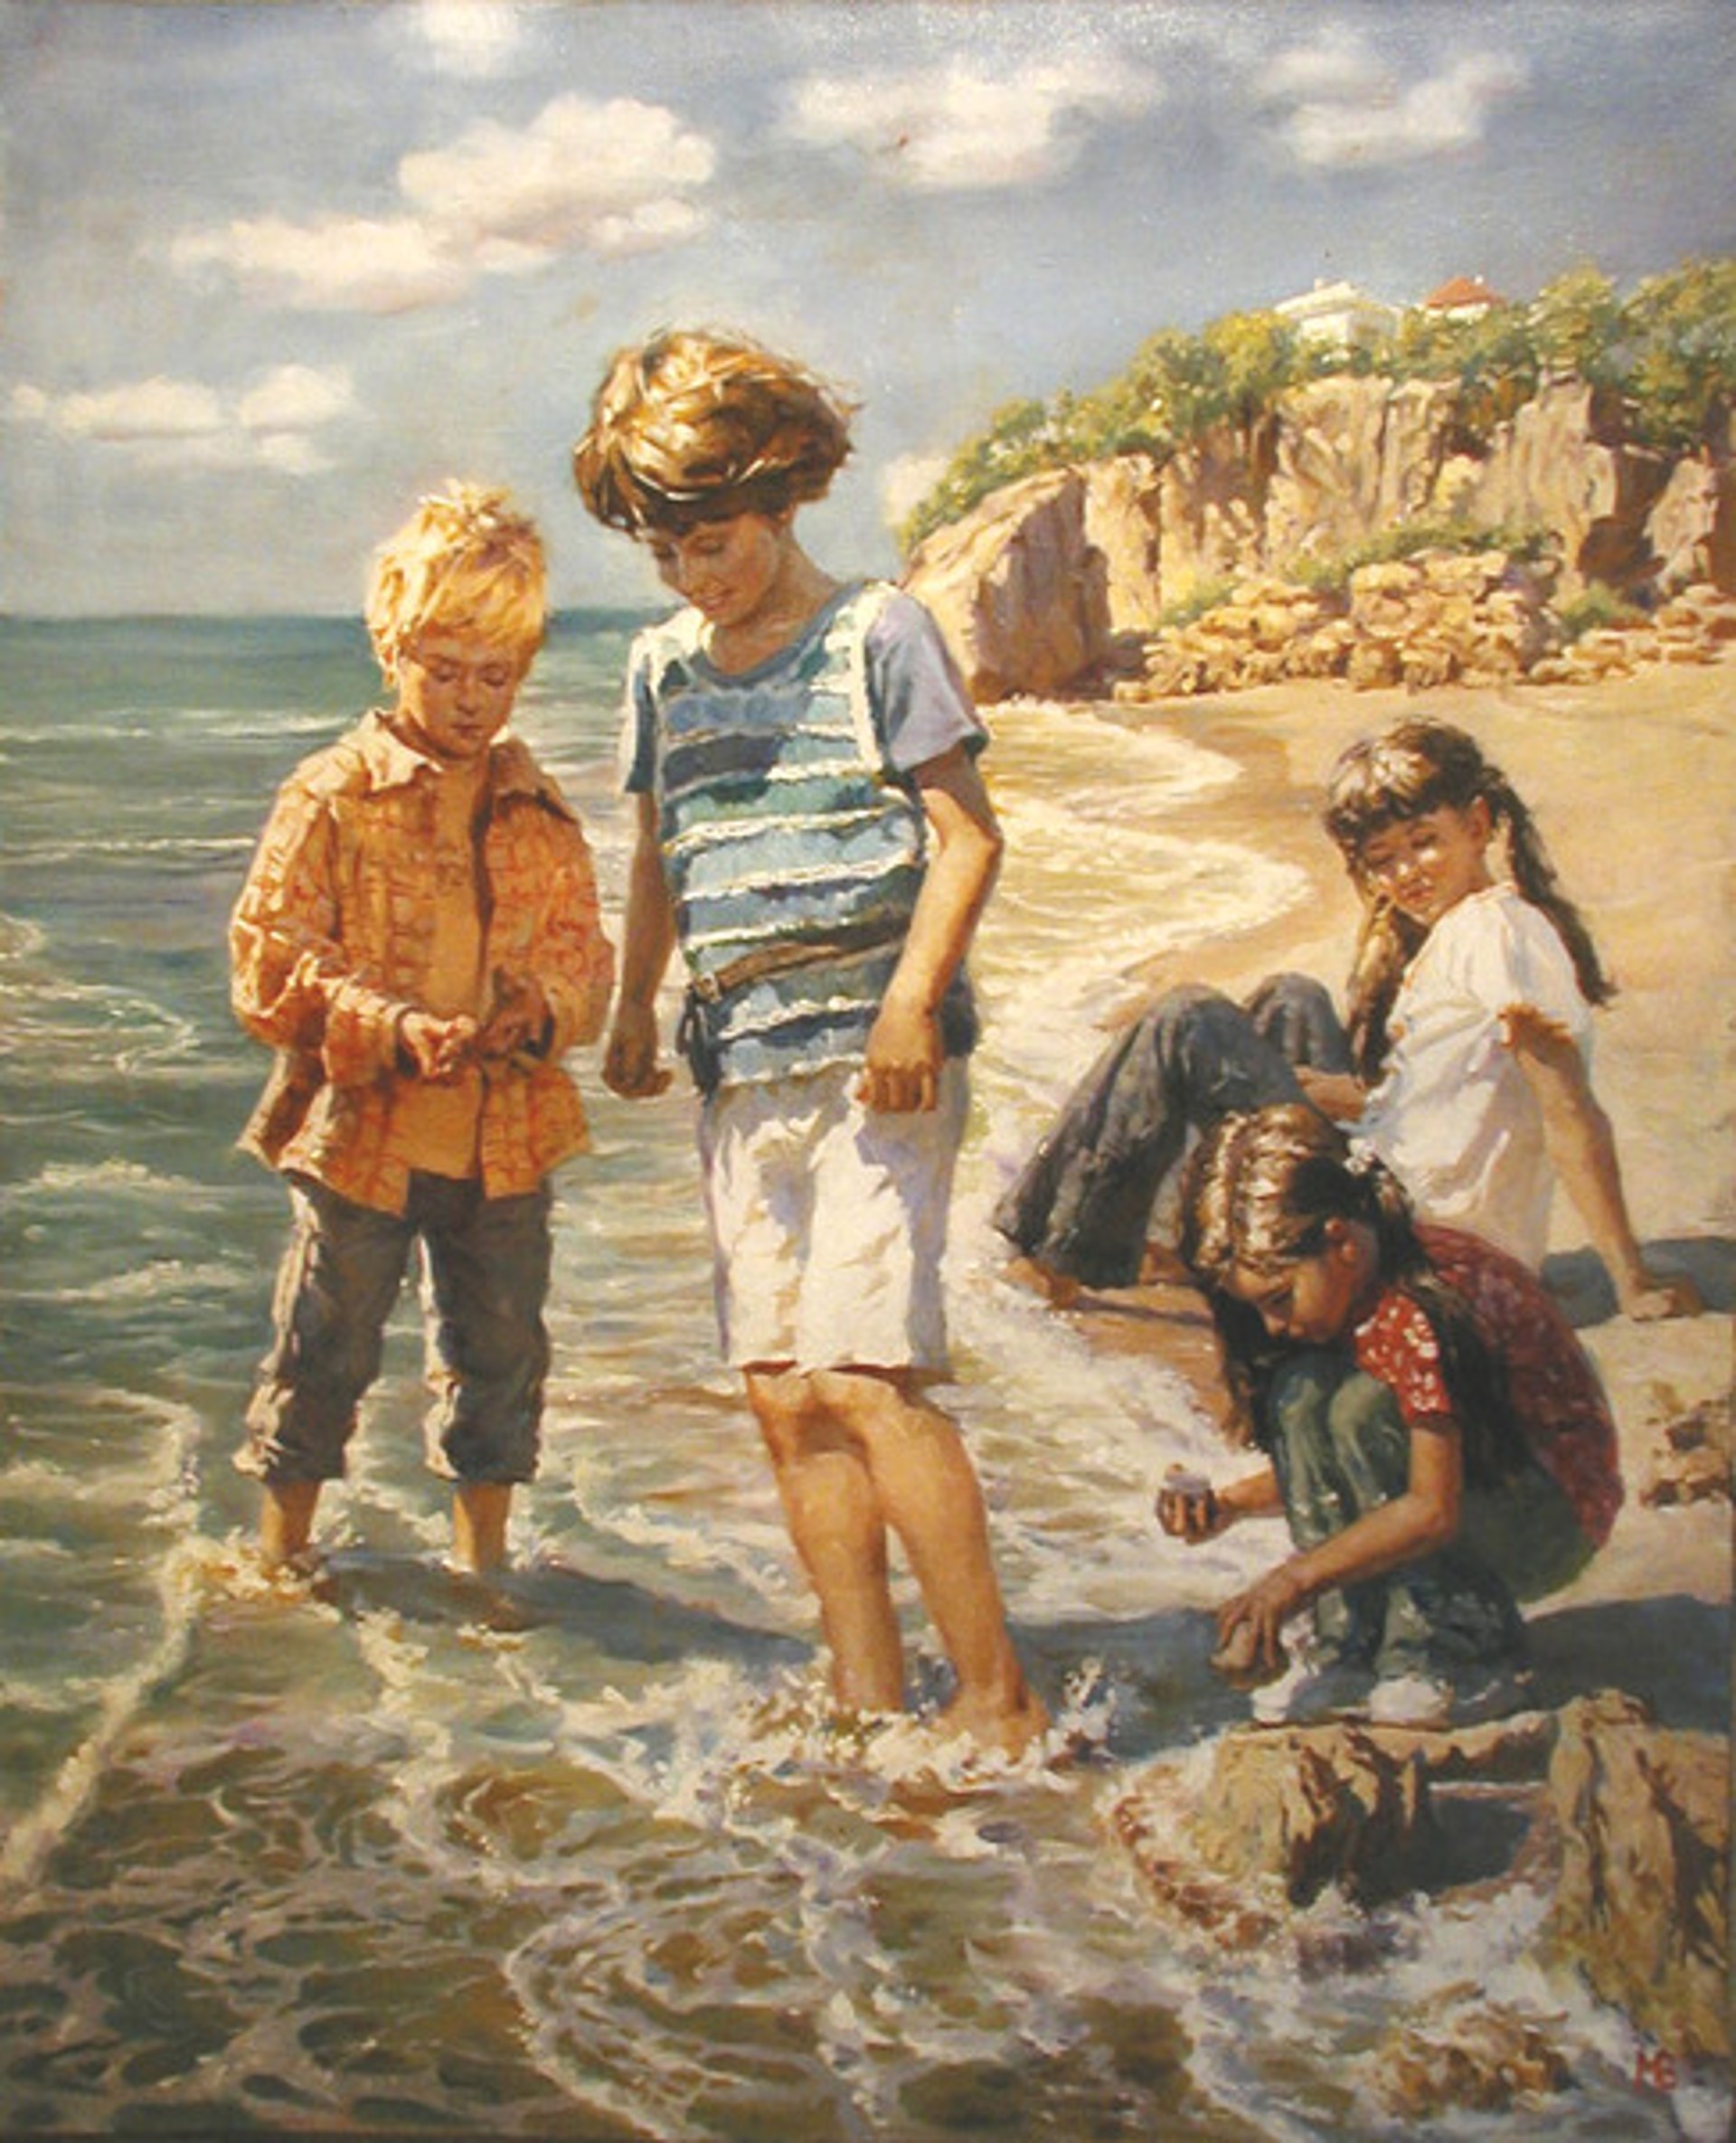 Playing at the Beach by Vyacheslav Morgun